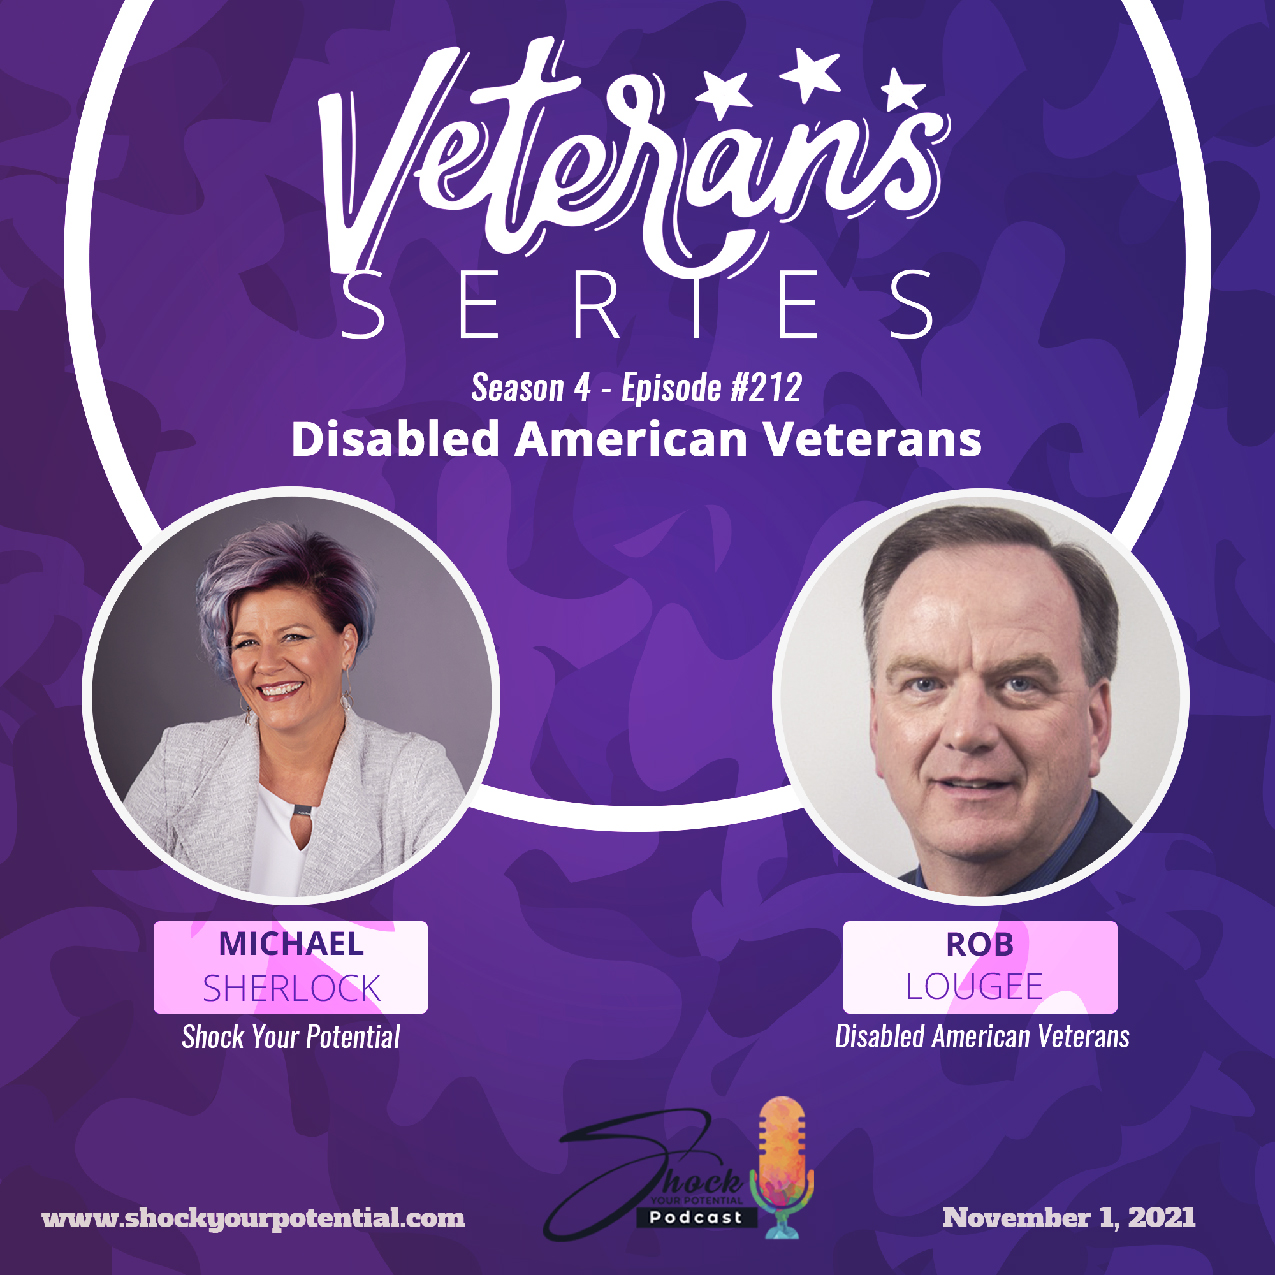 Disabled American Veterans- Rob Lougee